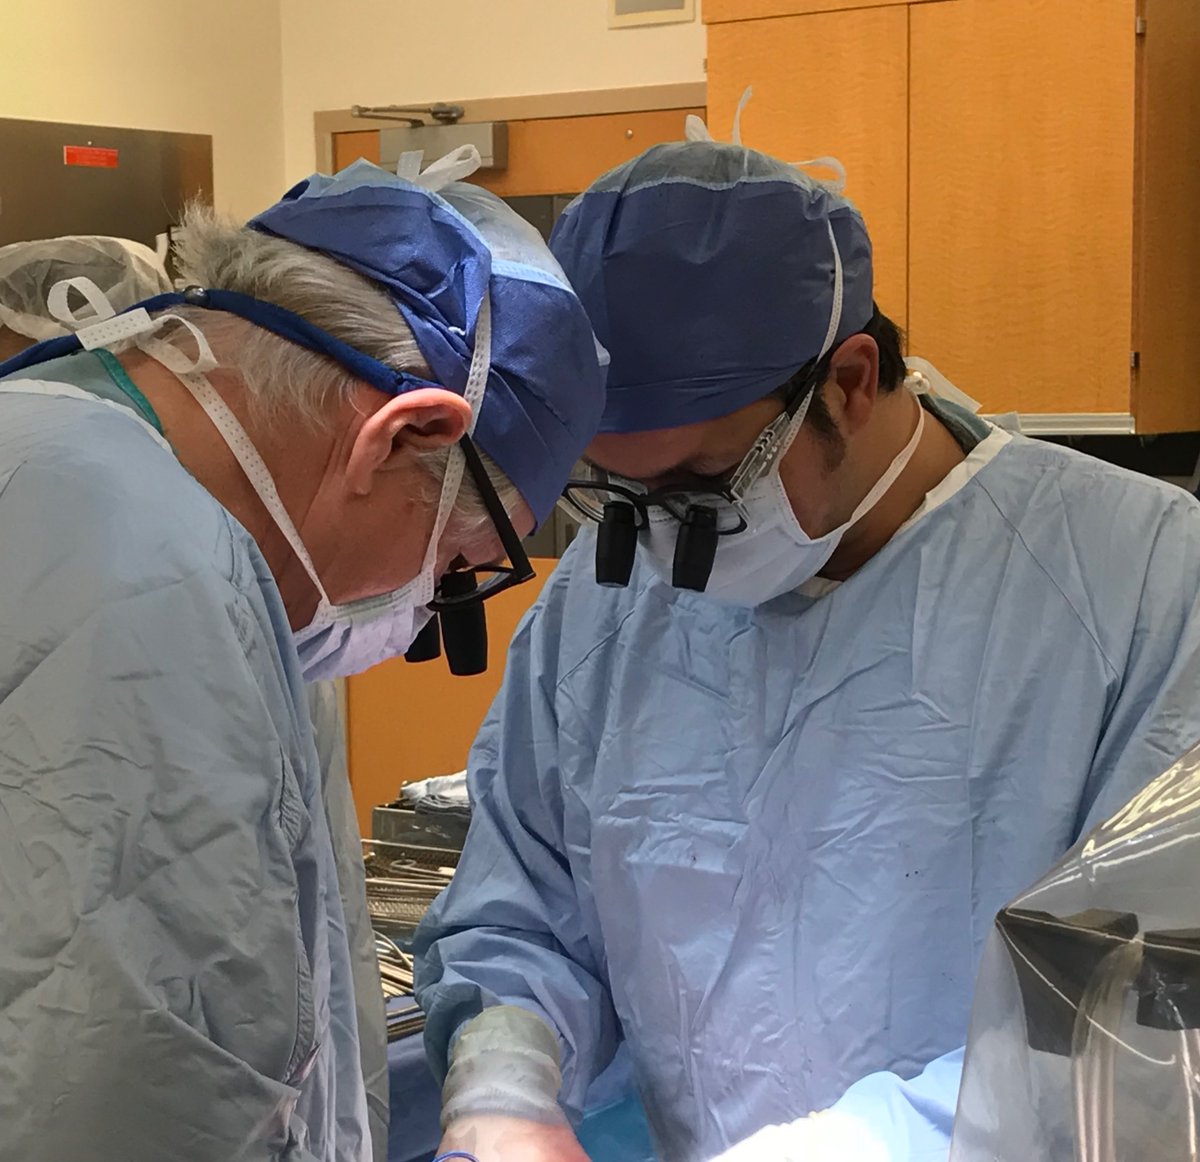 @JCoselli_MD @BCM_Surgery @BCM_Thoracic I am honored to have the privilege and opportunity to call you a mentor, partner, and friend.
#aortaEd @BCM_Surgery